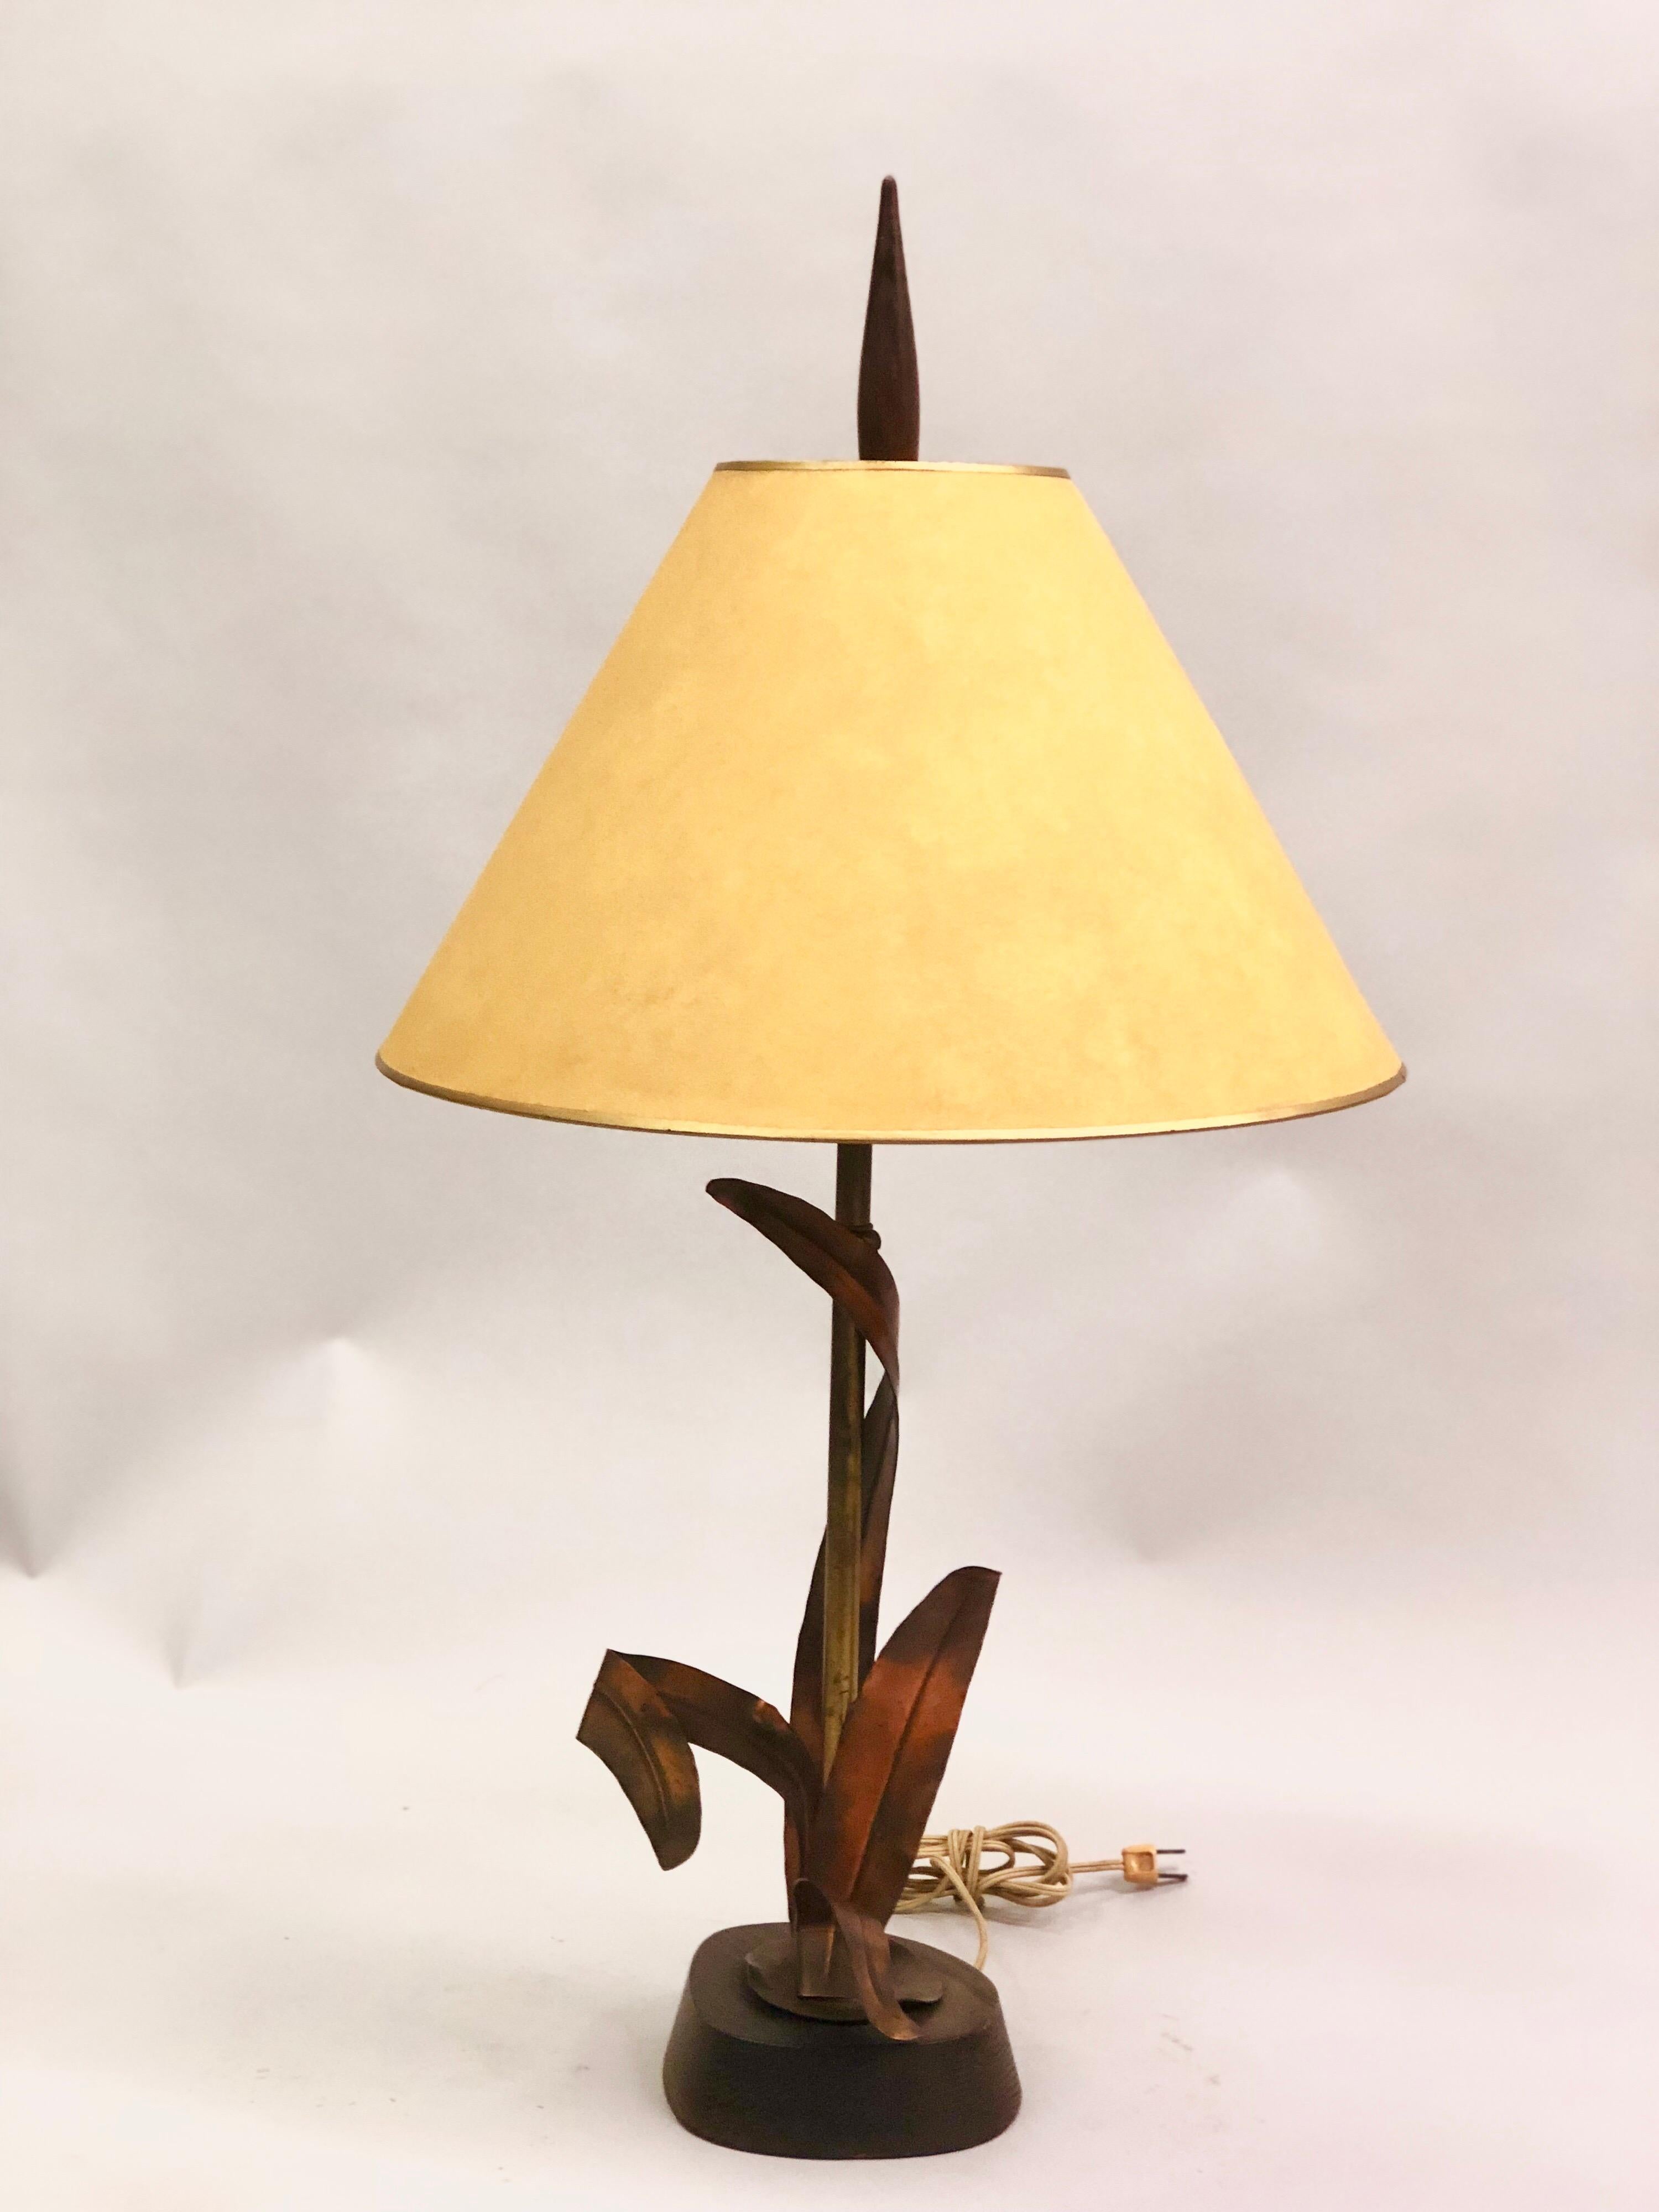 French Mid-Century Modern copper, bronze and brass floral table lamp by Maison Charles et Fils. The copper is elegantly formed to wraparound a brass stem. Base and tapered finial are composed of wood.  Measurements: Diameter of lamp itself is 8